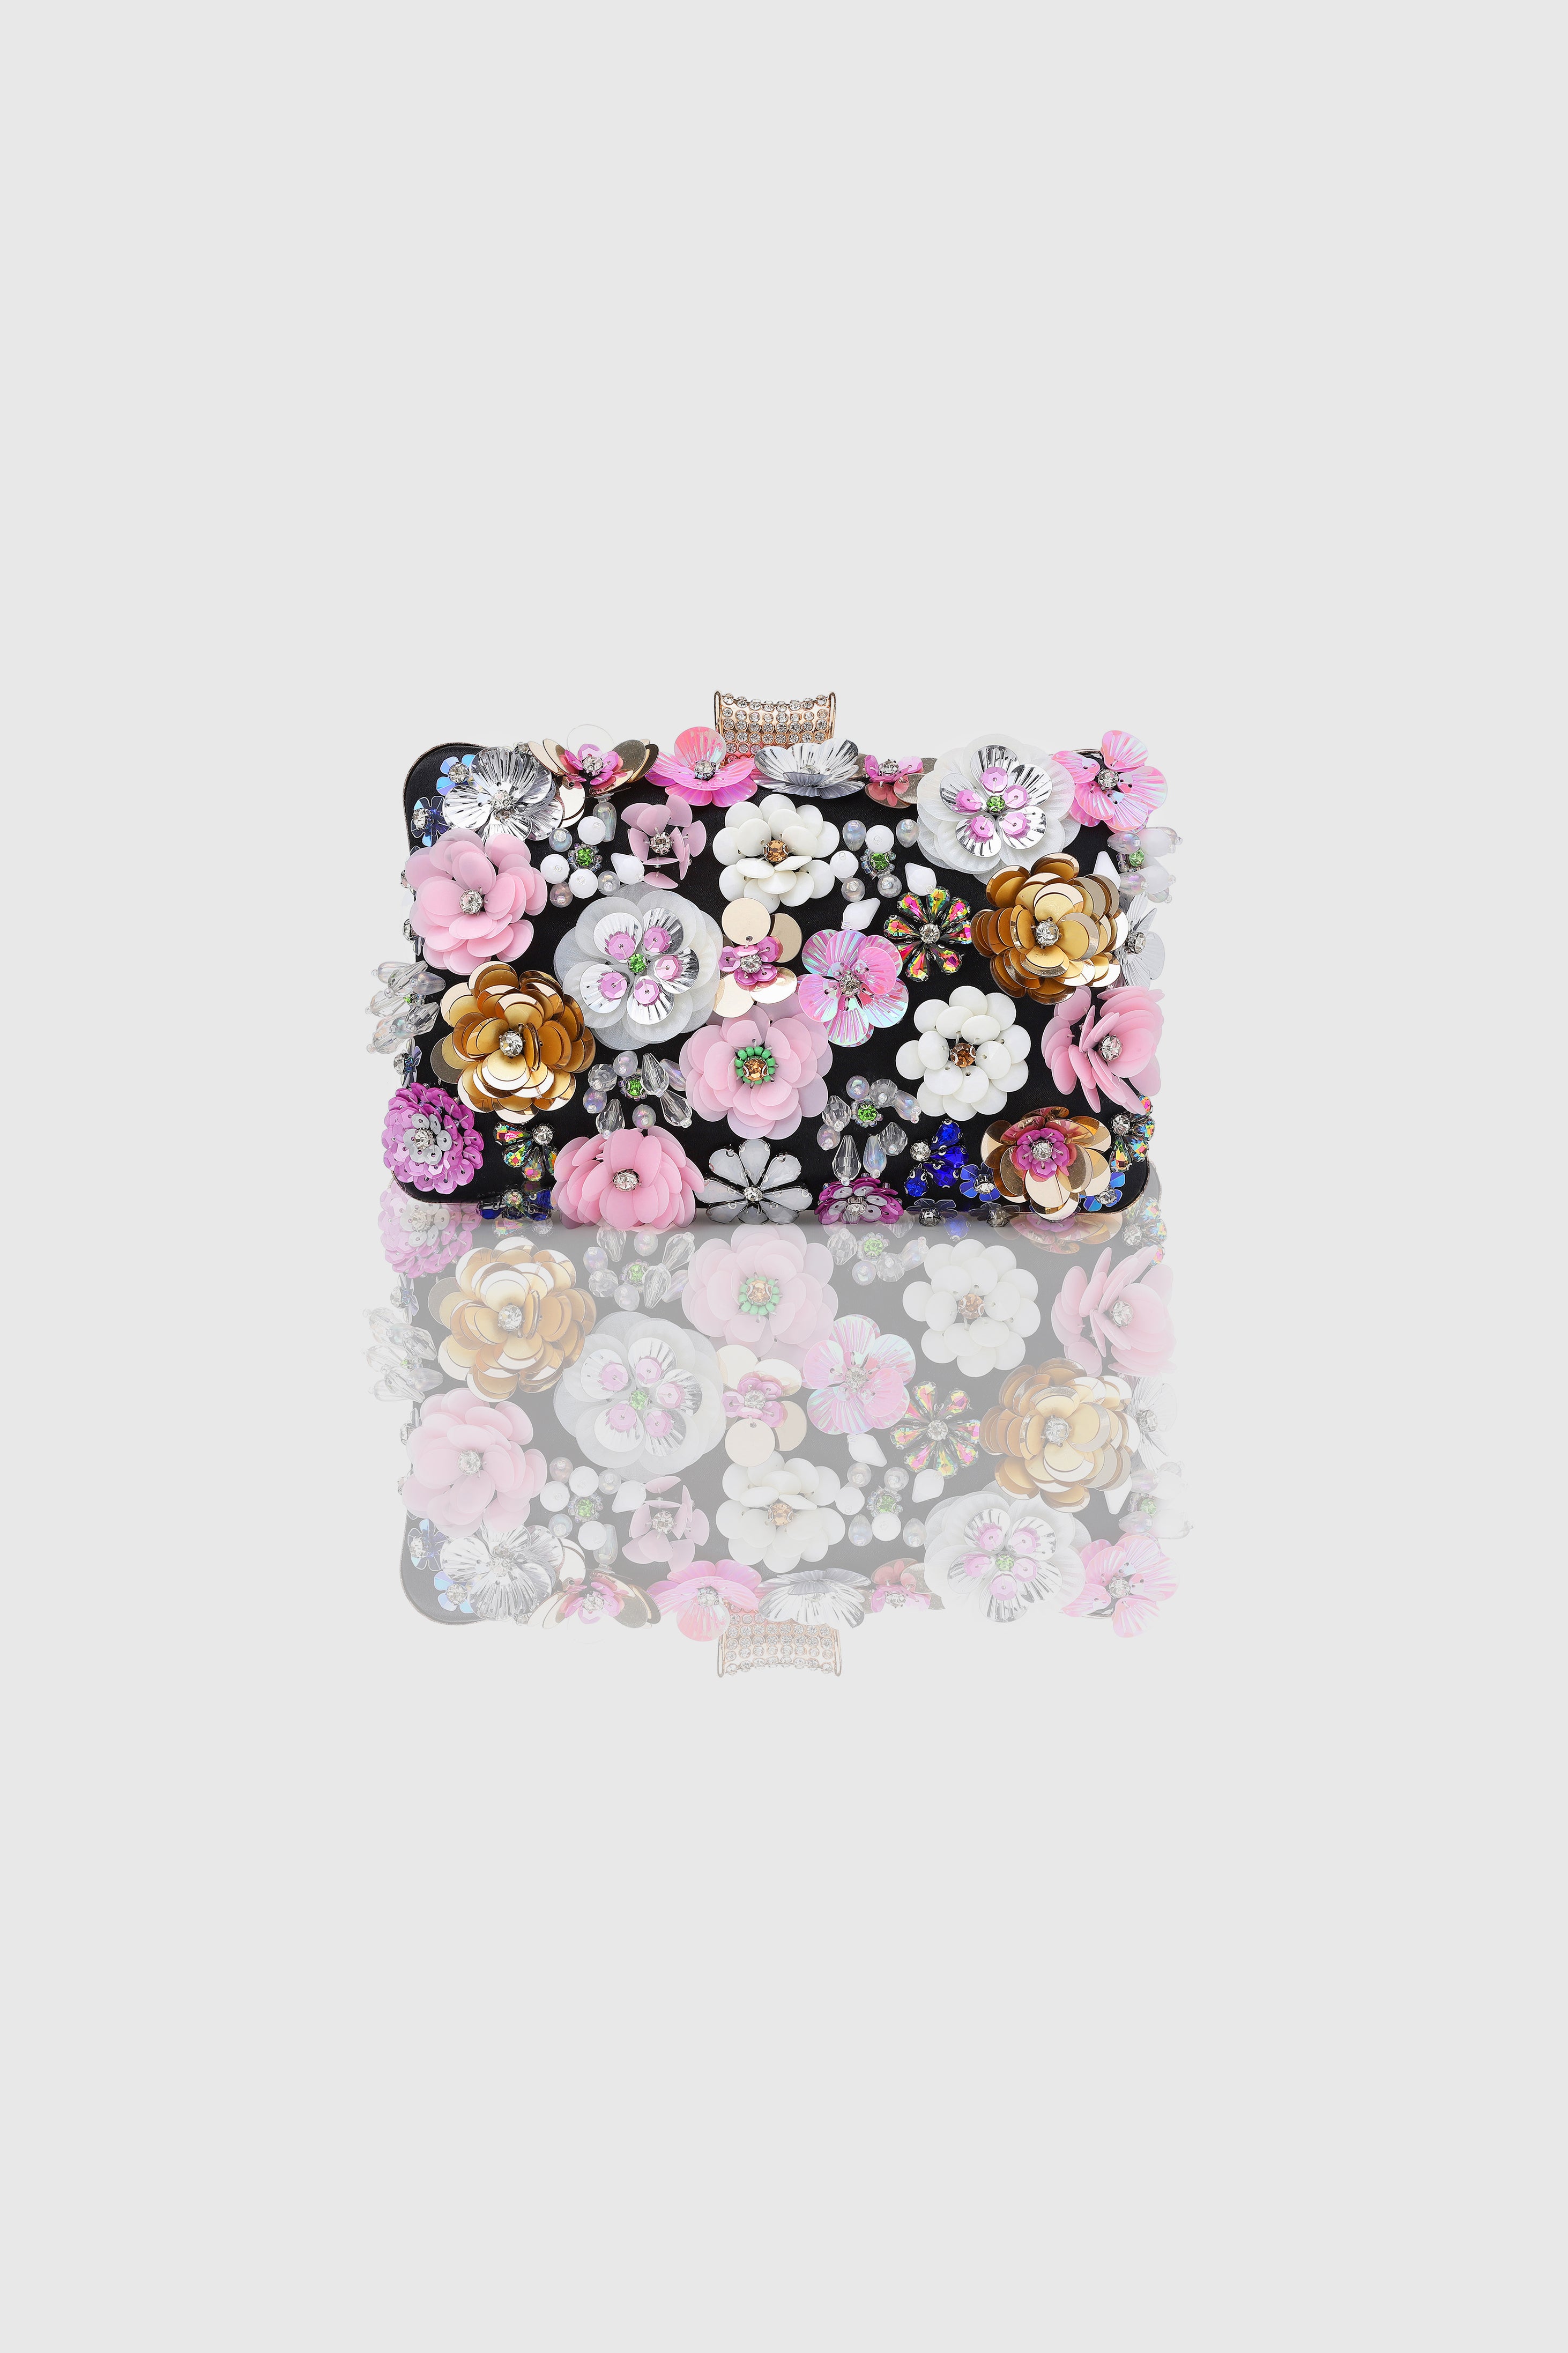 BABEYOND Women's Floral Embroidery Evening Bag